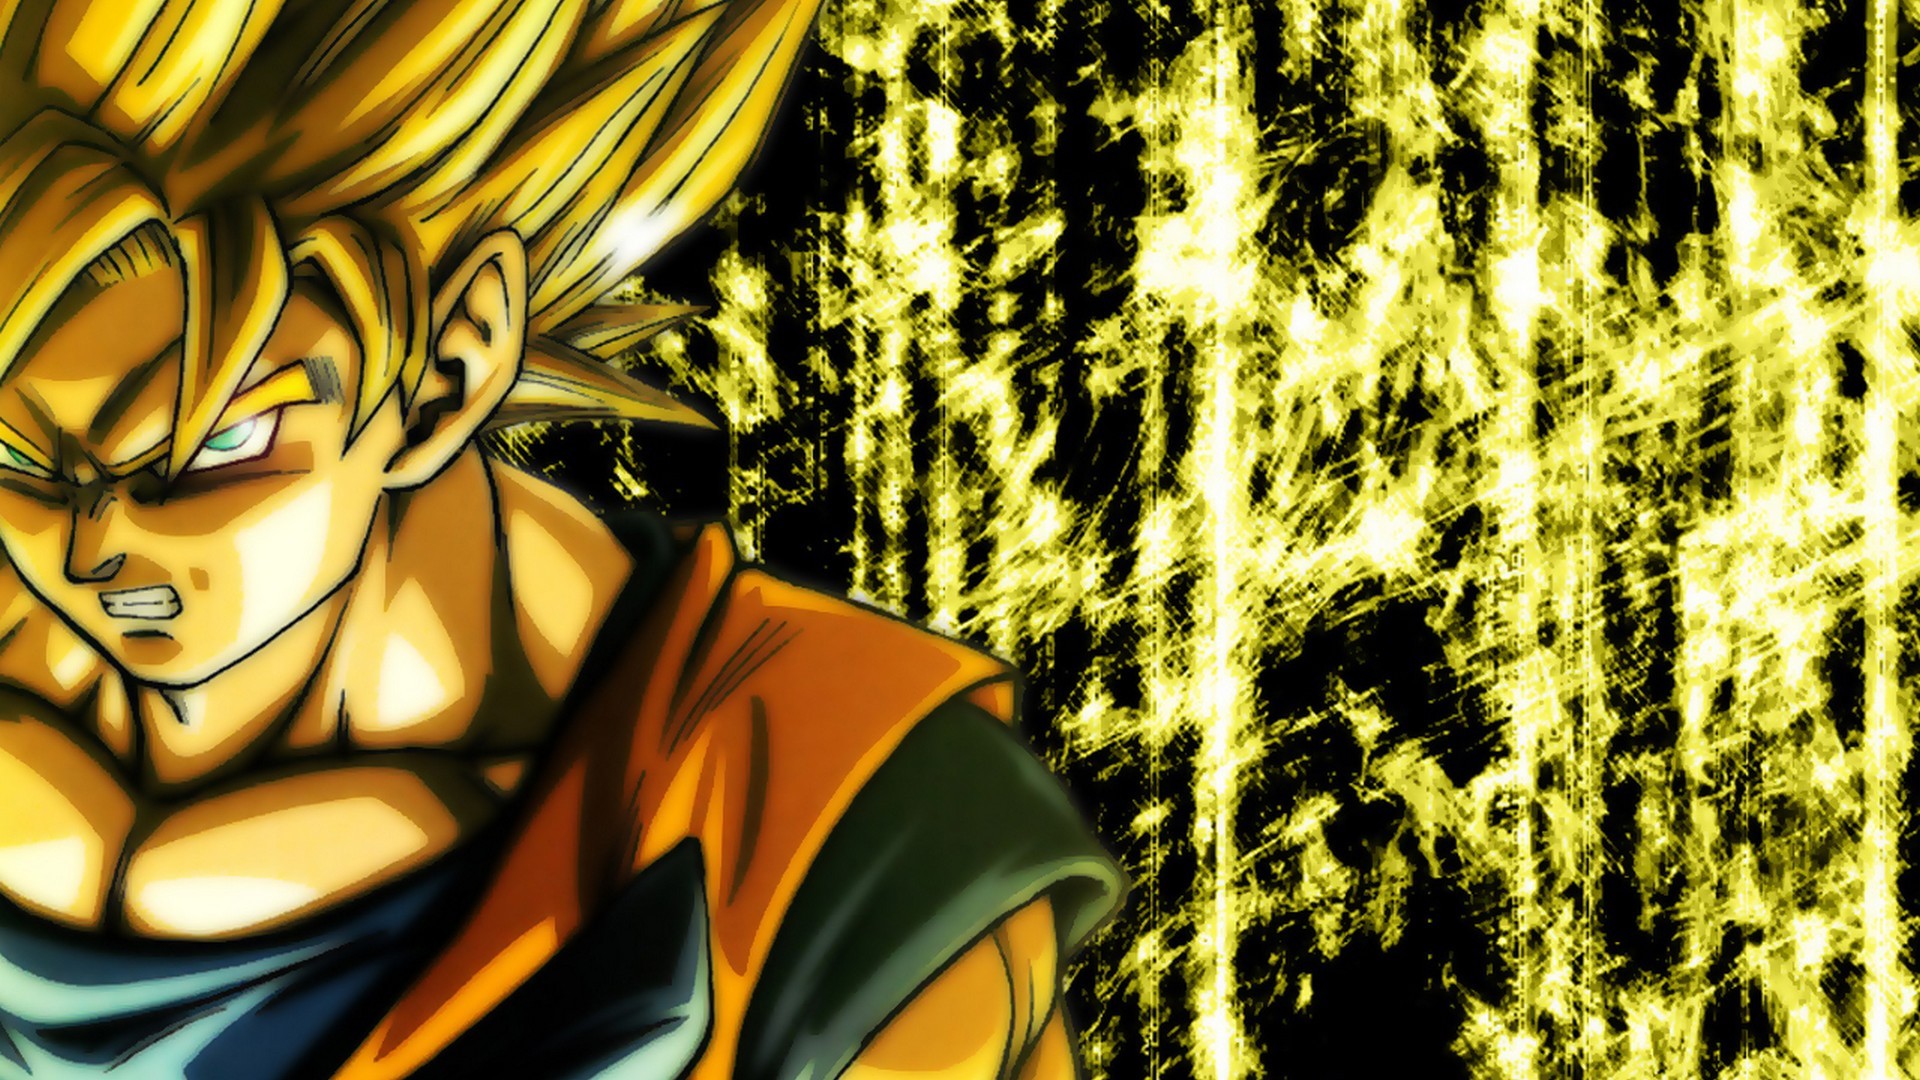 HD Goku Super Saiyan Backgrounds with resolution 1920X1080 pixel. You can use this wallpaper as background for your desktop Computer Screensavers, Android or iPhone smartphones